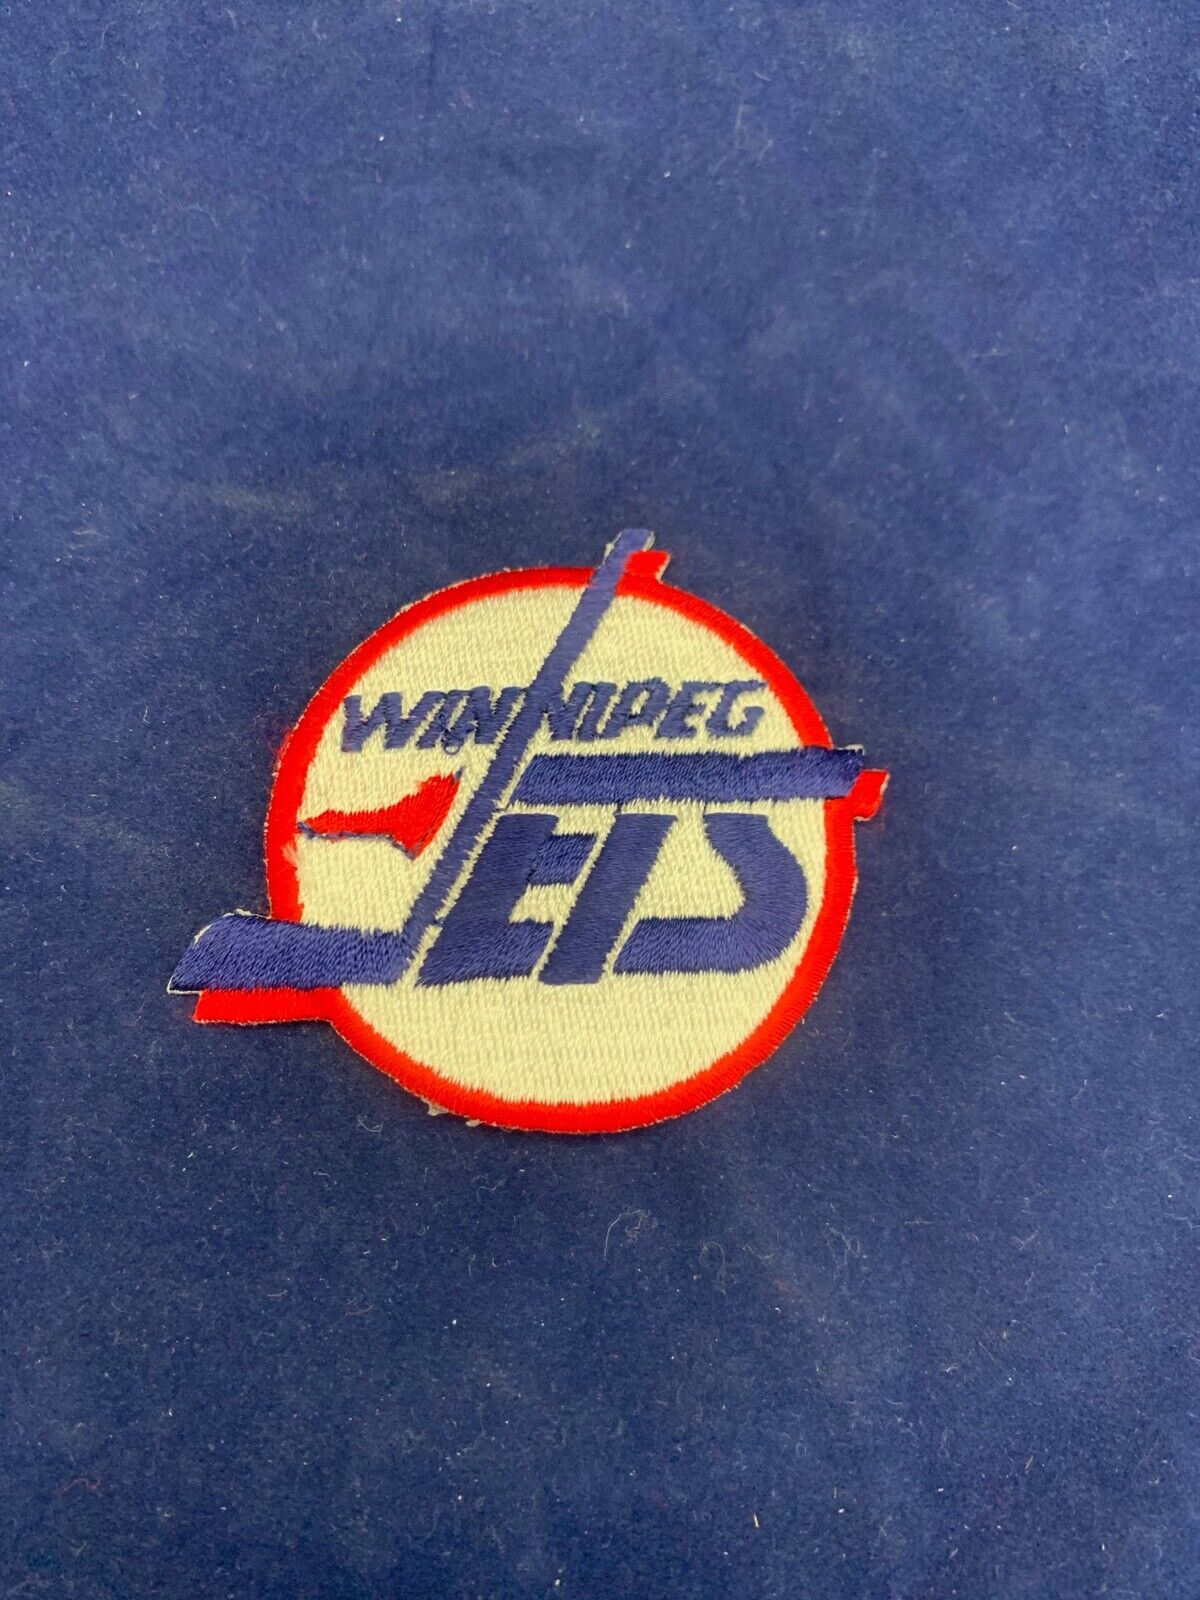 Winnipeg Jets Small Logo Patch Size 2.5 x 2.75 inches OLD LOGO